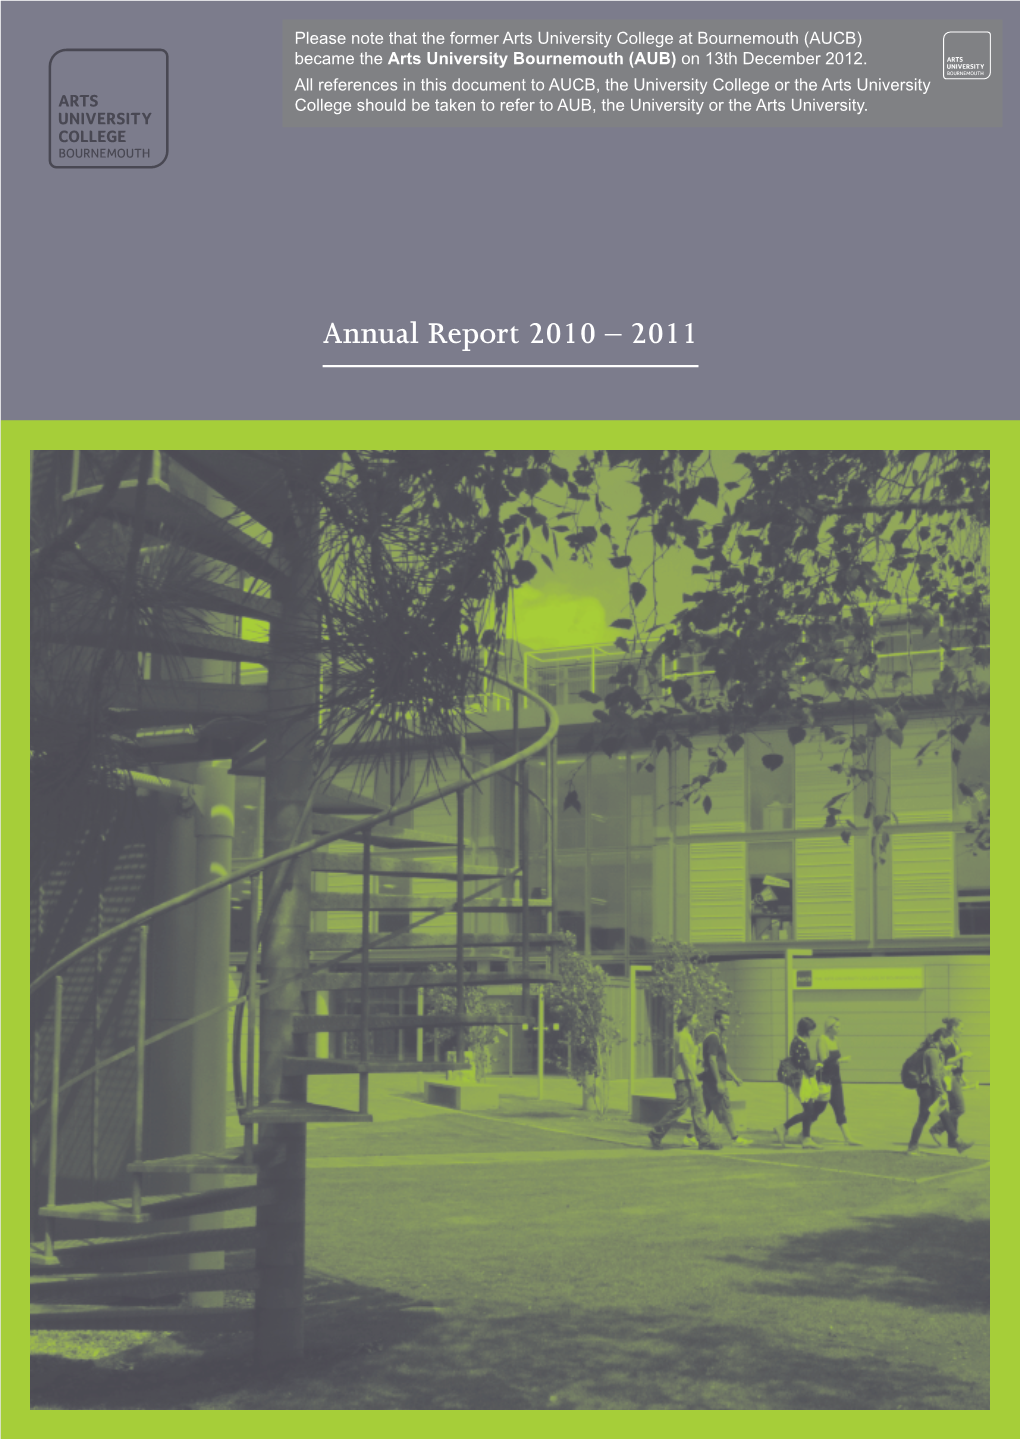 Annual Report 2010 – 2011 Contents